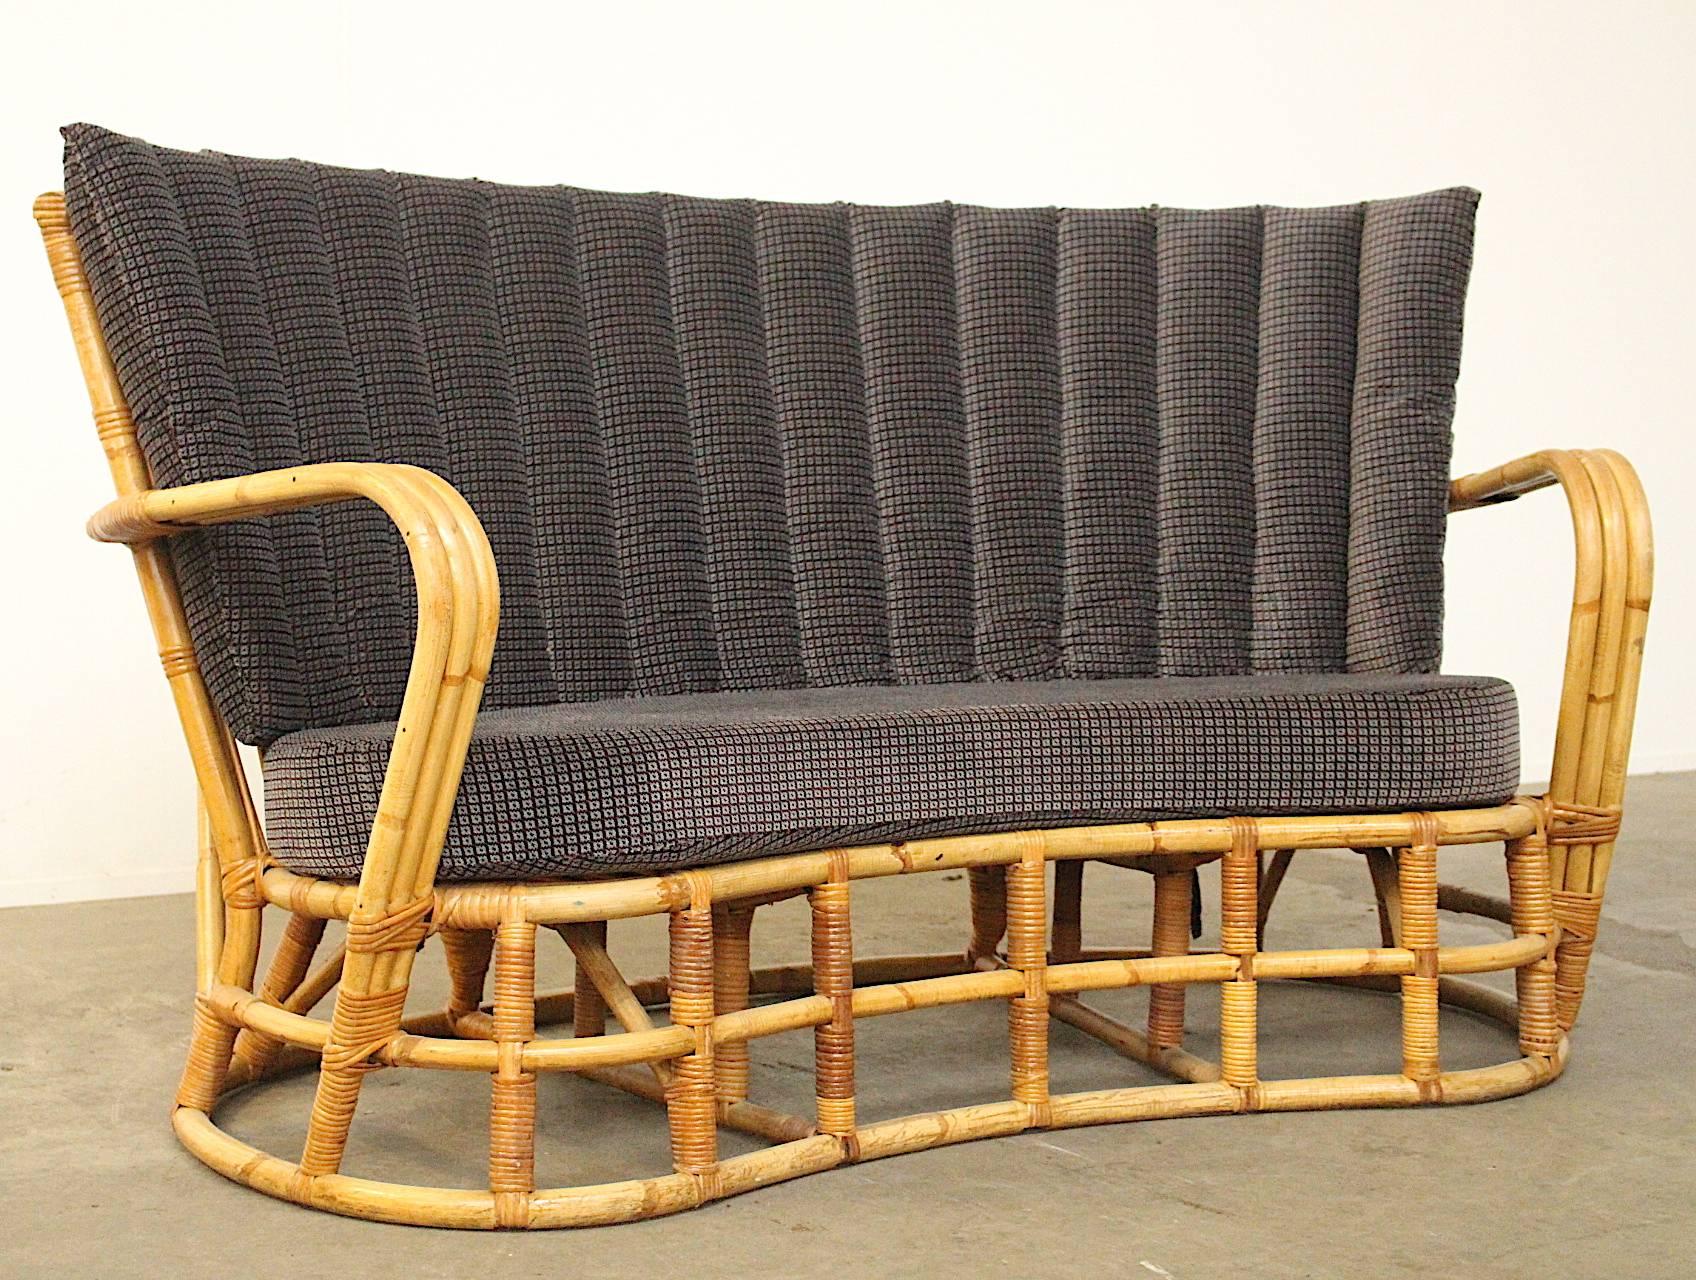 Stunning rattan sofa or settee in the style of Giovanni Travasa. The sofa has beautiful organic curves and a wonderfully handcrafted frame that holds two very comfortable thick foam cushions with a square S-patterned dark gray and black upholstery.